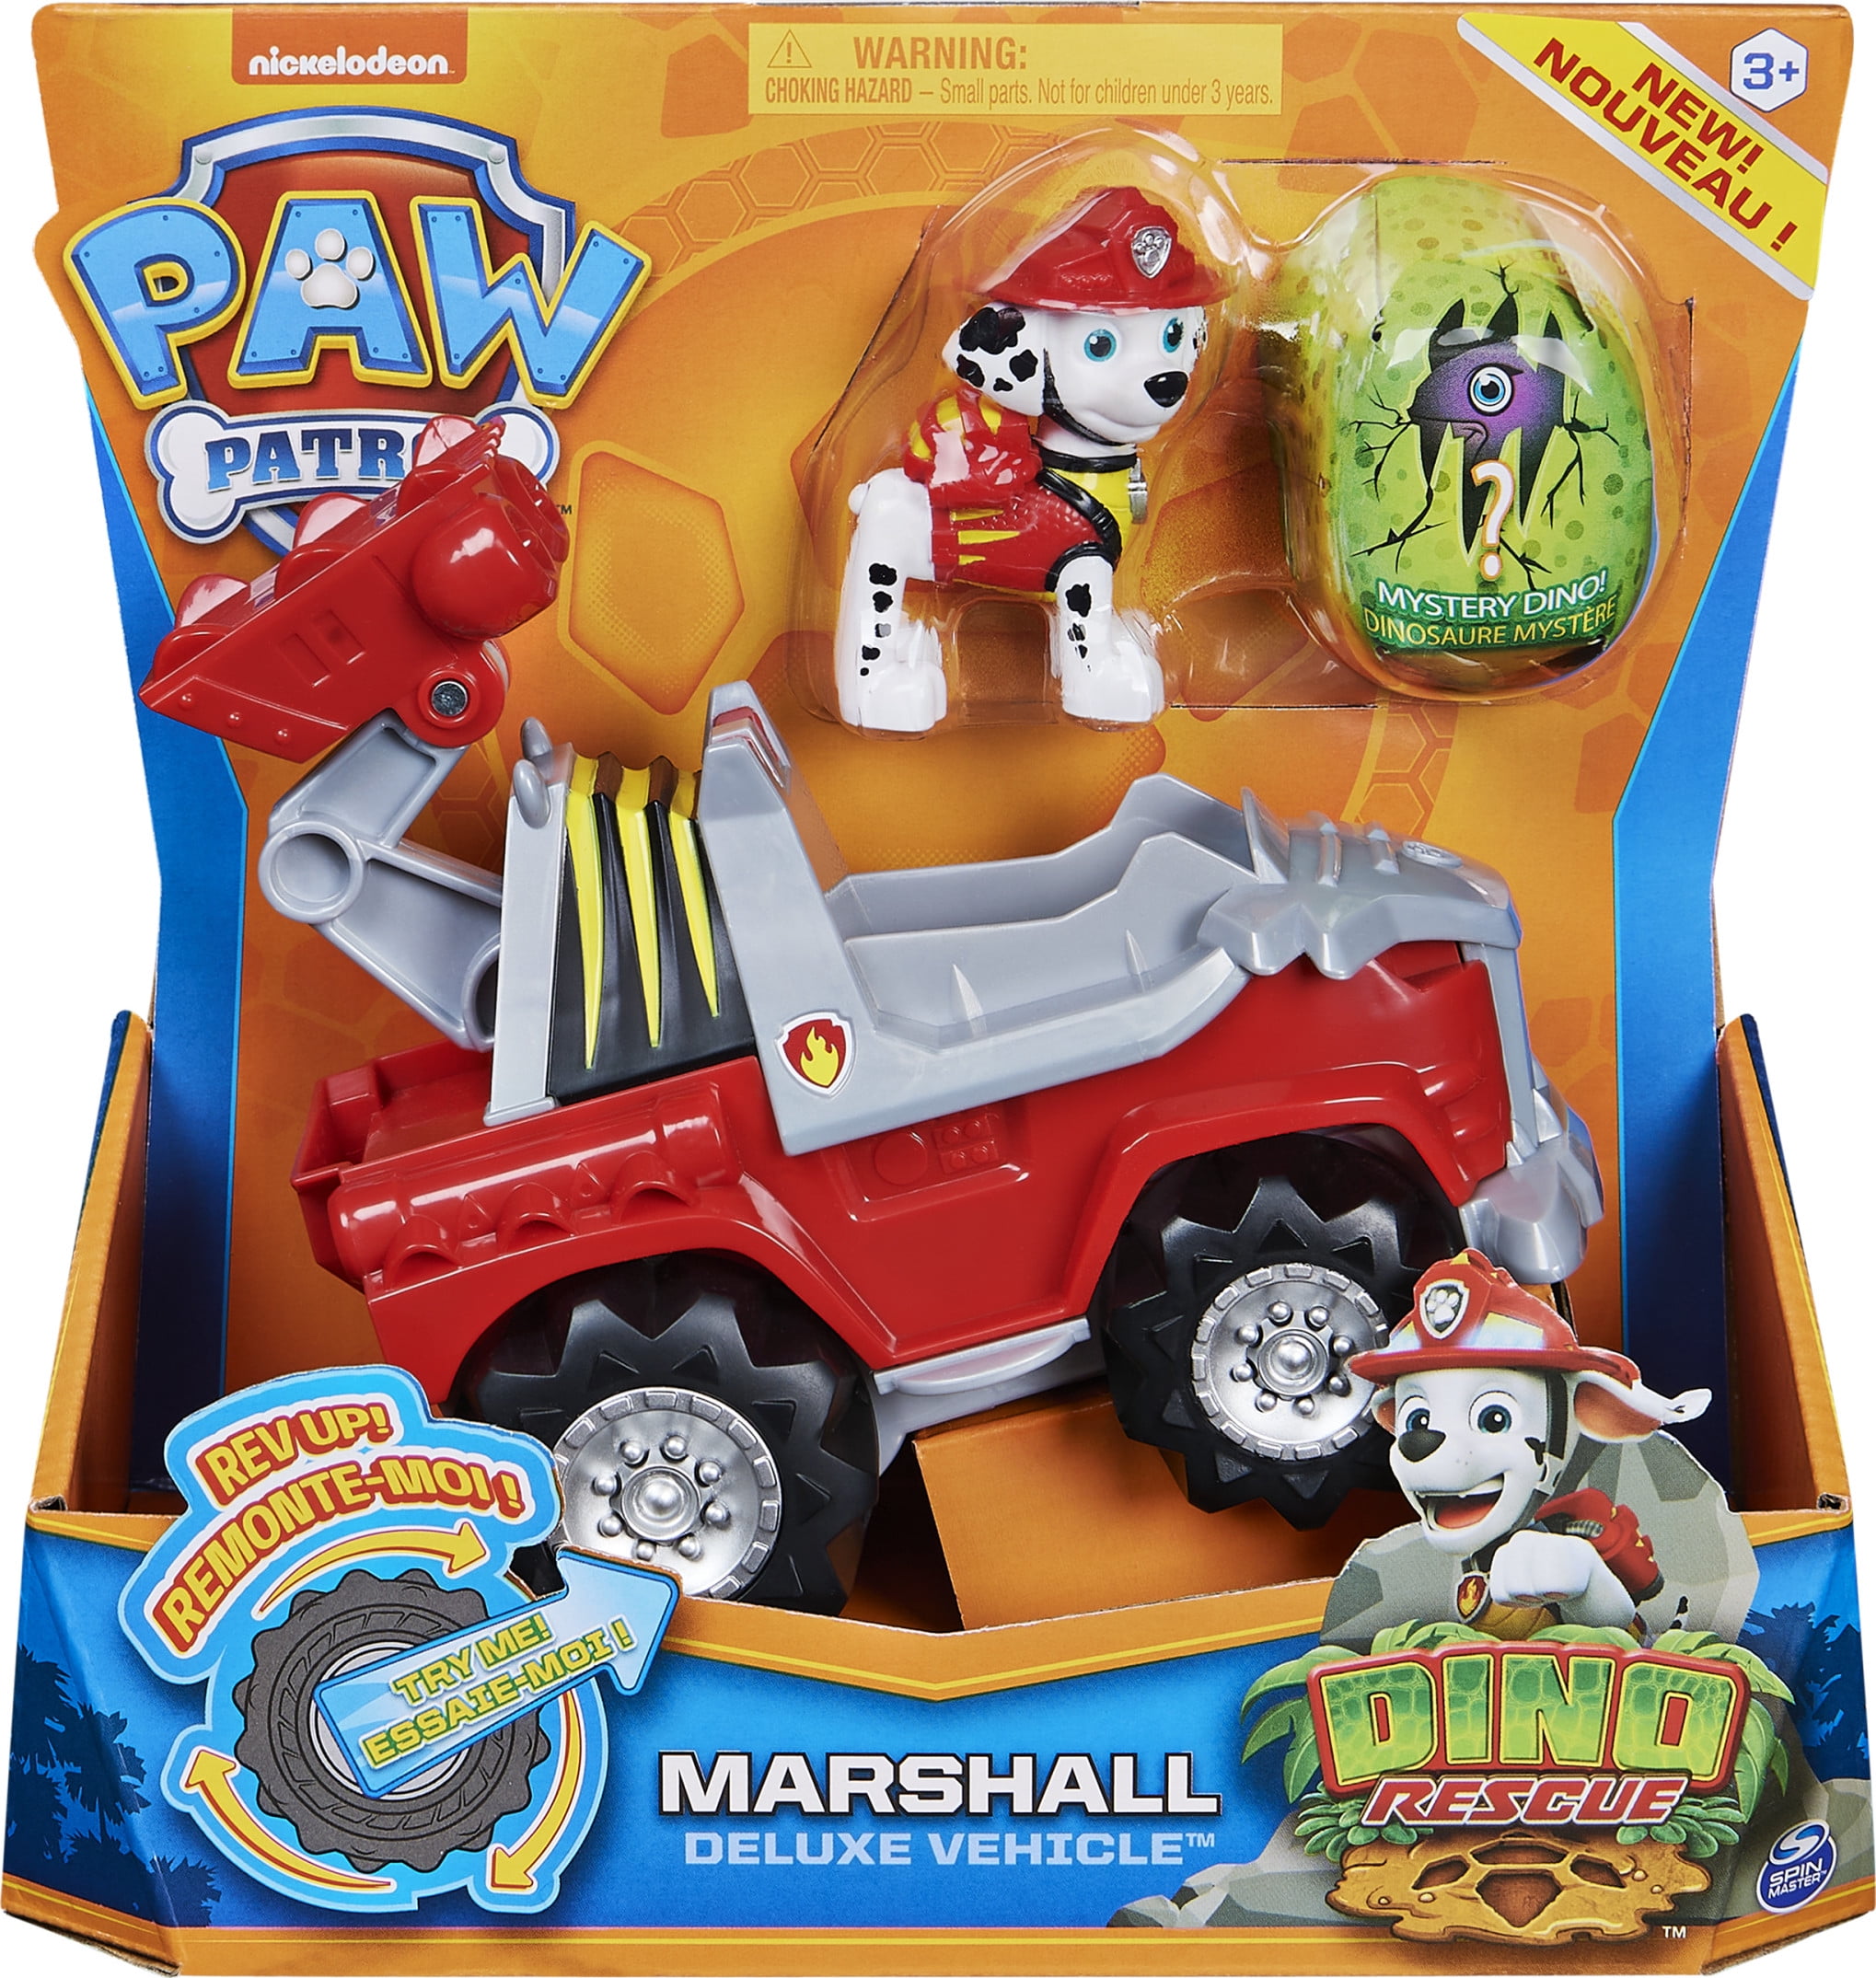 Paw Patrol Dino Rescue Marshall/’s Deluxe Rev Up Vehicle with Mystery Dinosaur Figure